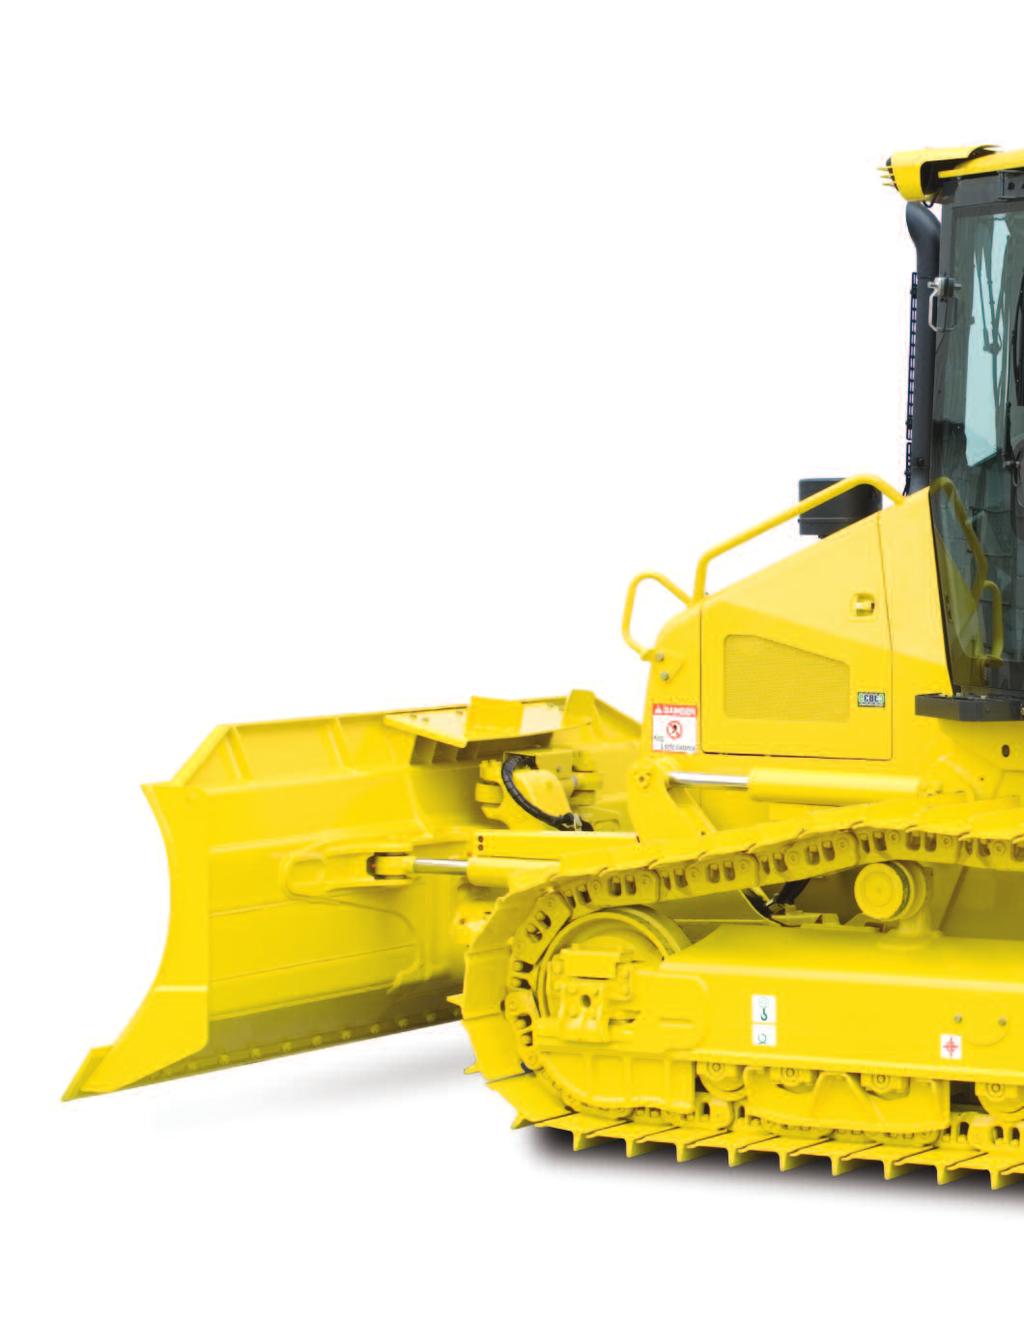 C R A W L E R D O Z E R WALK-AROUND All-around Visibility Super-slant nose design Cab-forward design Integrated ROPS/FOPS (Level 2) Increased Productivity Highest HP in its class